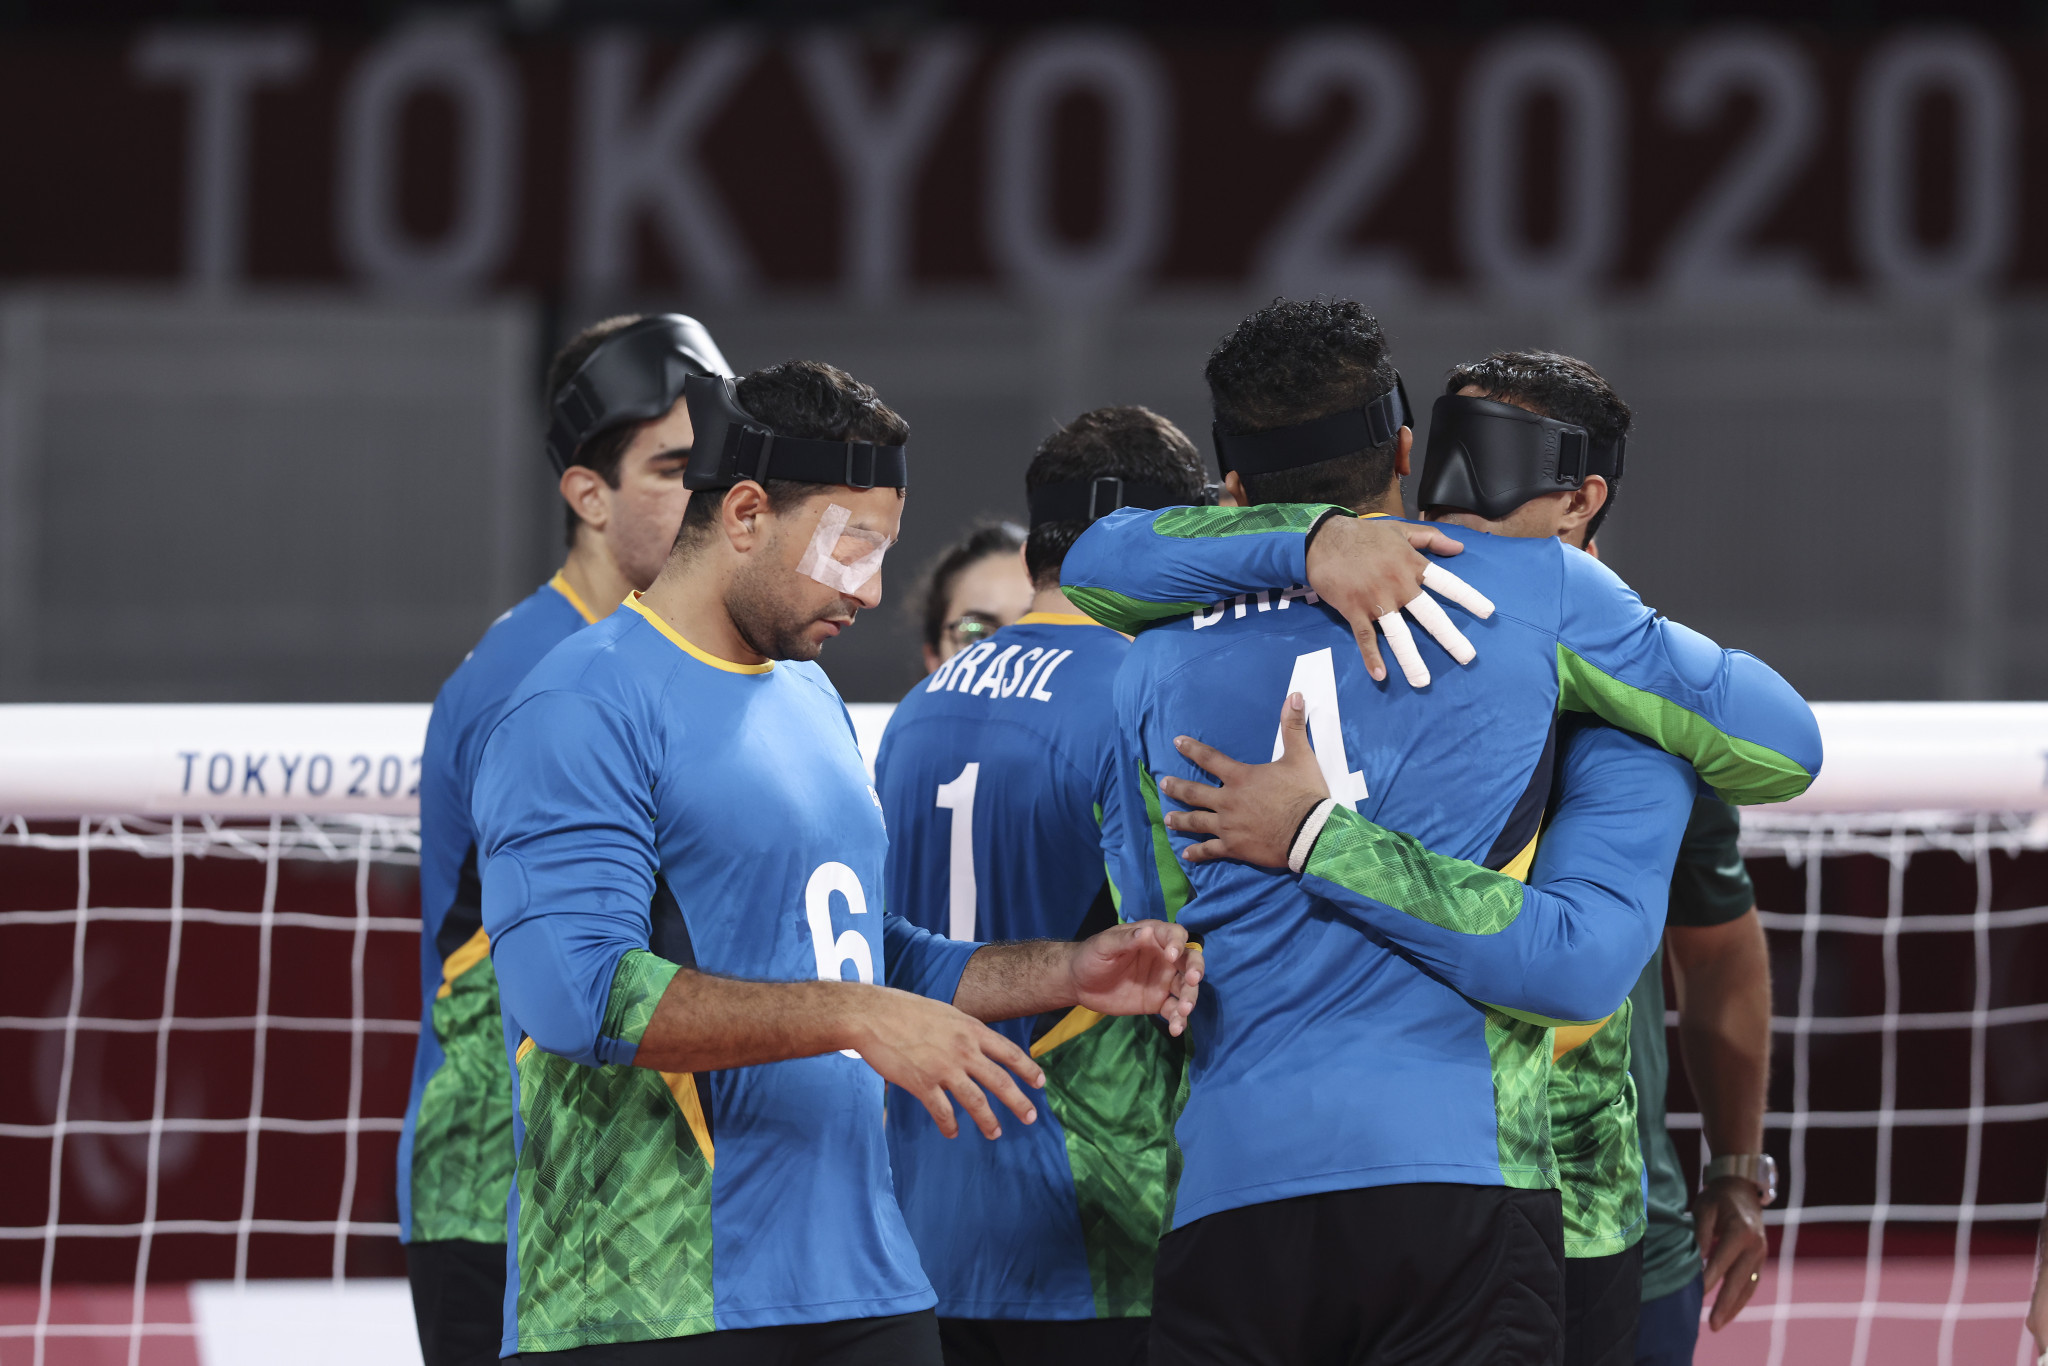 Brazil claimed the gold medal in the men's goalball final ©Getty Images